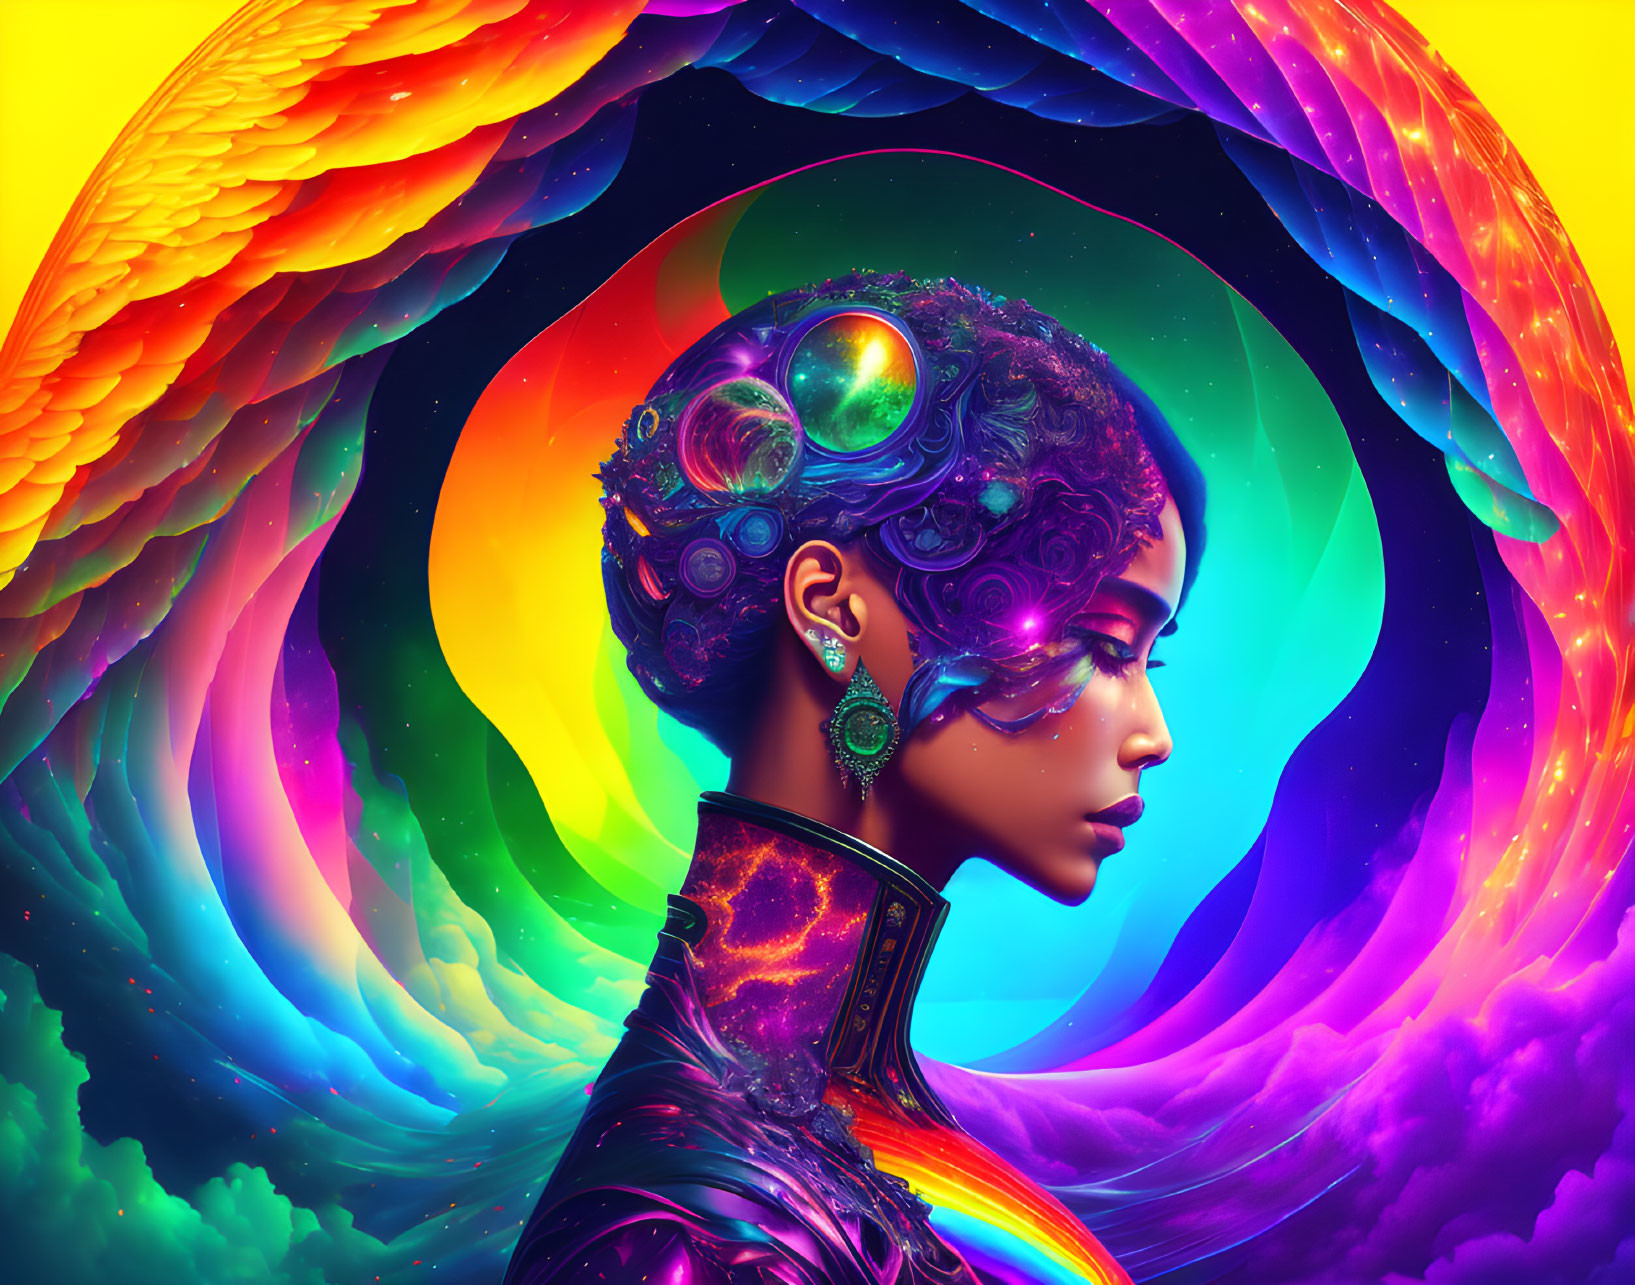 Colorful Cosmic-Themed Headpiece on Woman in Abstract Portrait